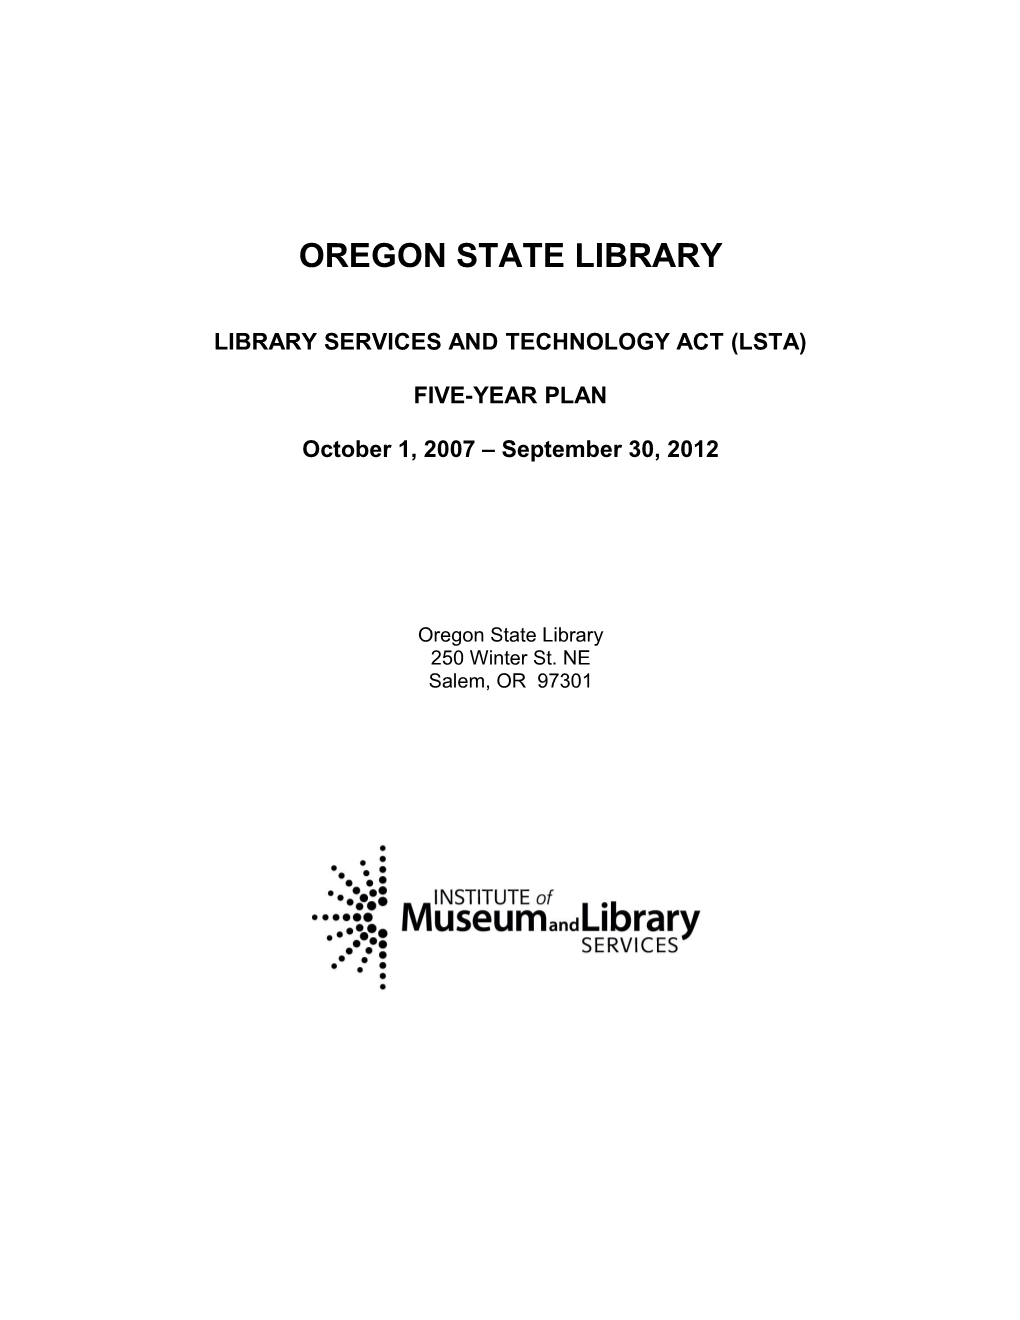 Library Services and Technology Act (Lsta)